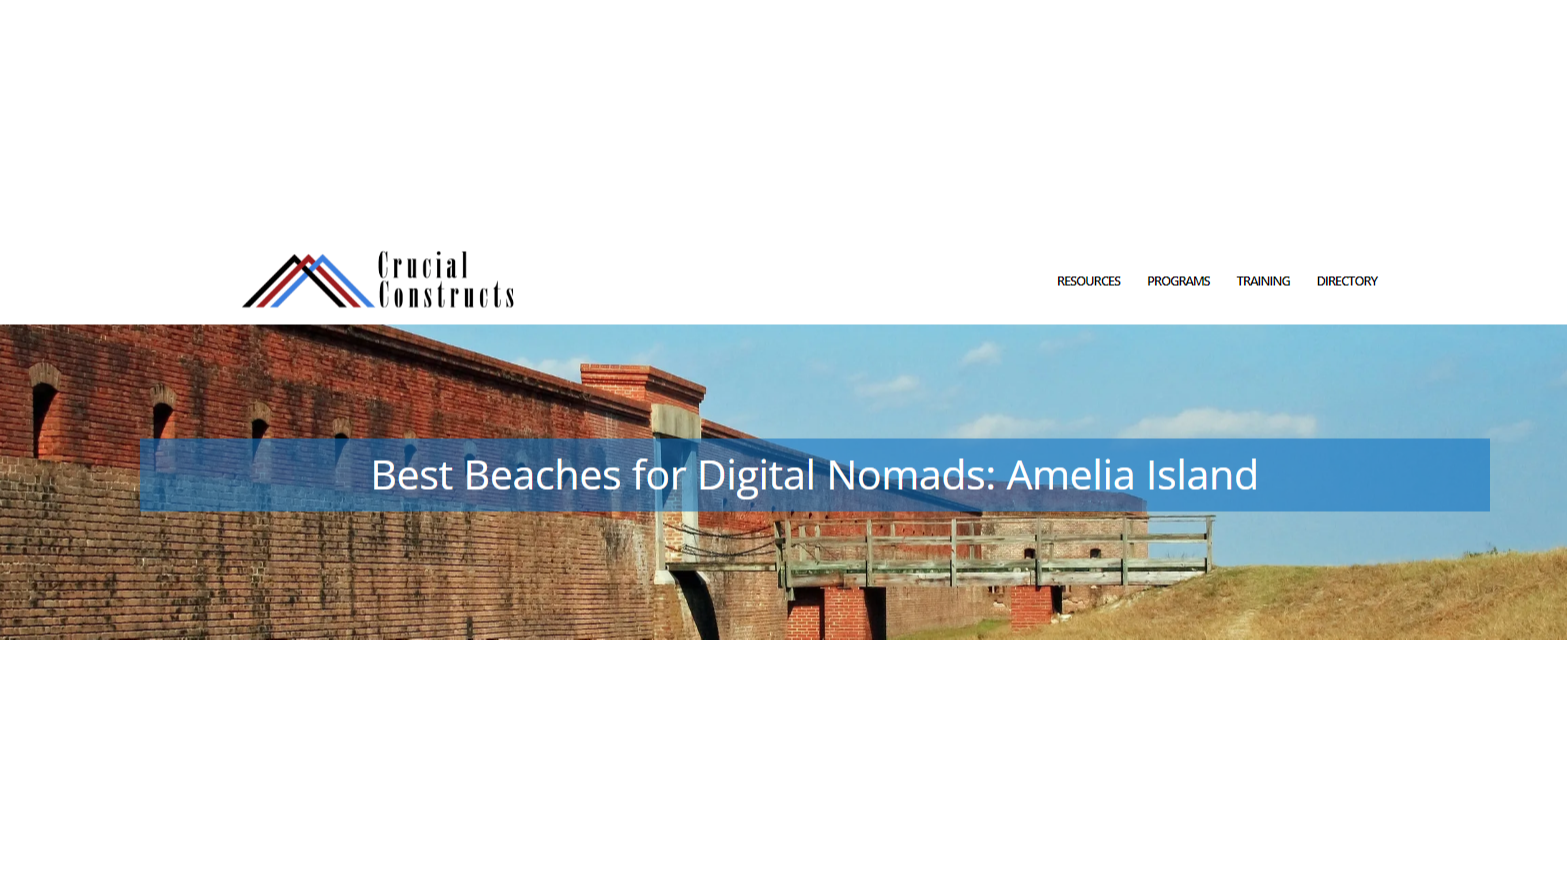 New Guide Shows Why Amelia Island Is The Best Beach Destination For Remote Work